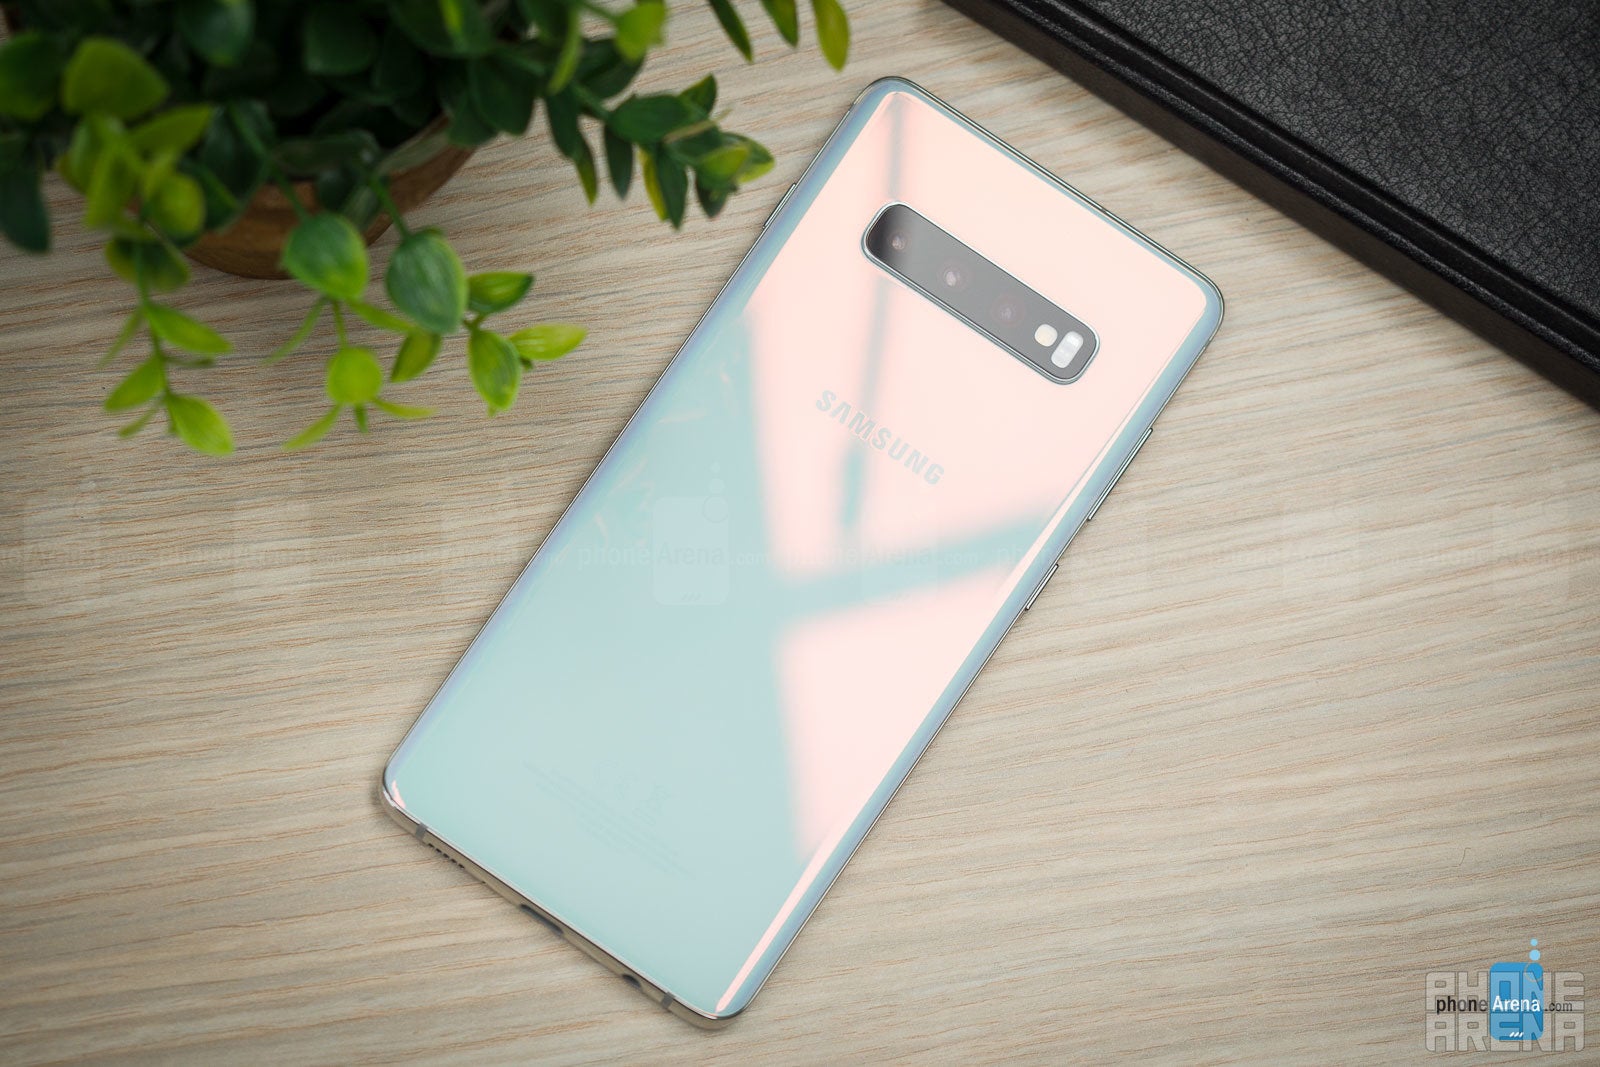 The Pearl White color in all its glory on the Galaxy S10+ - Samsung Galaxy S10 and S10+ Review